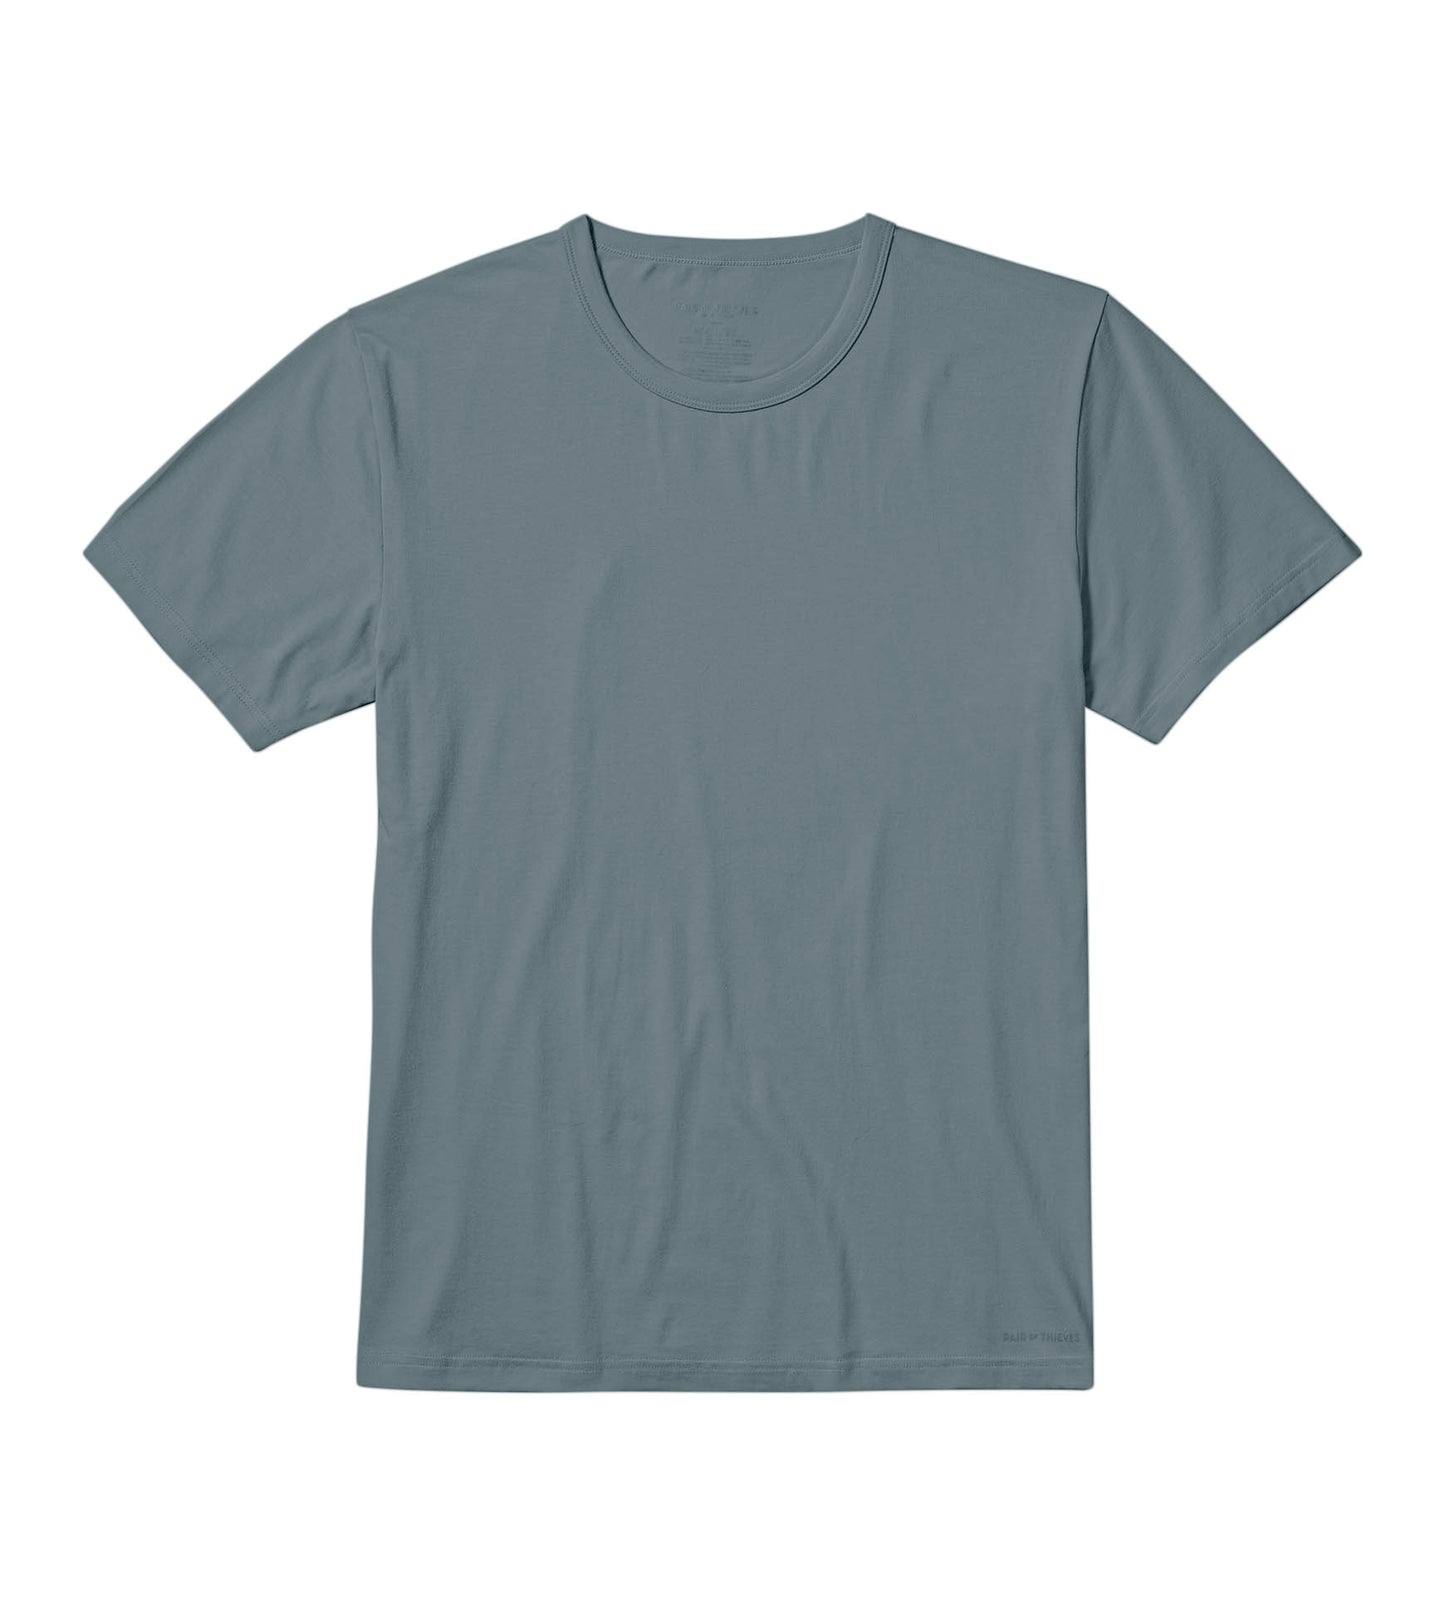 SuperSoft Crew Neck Tee - Pacific - Pair of Thieves